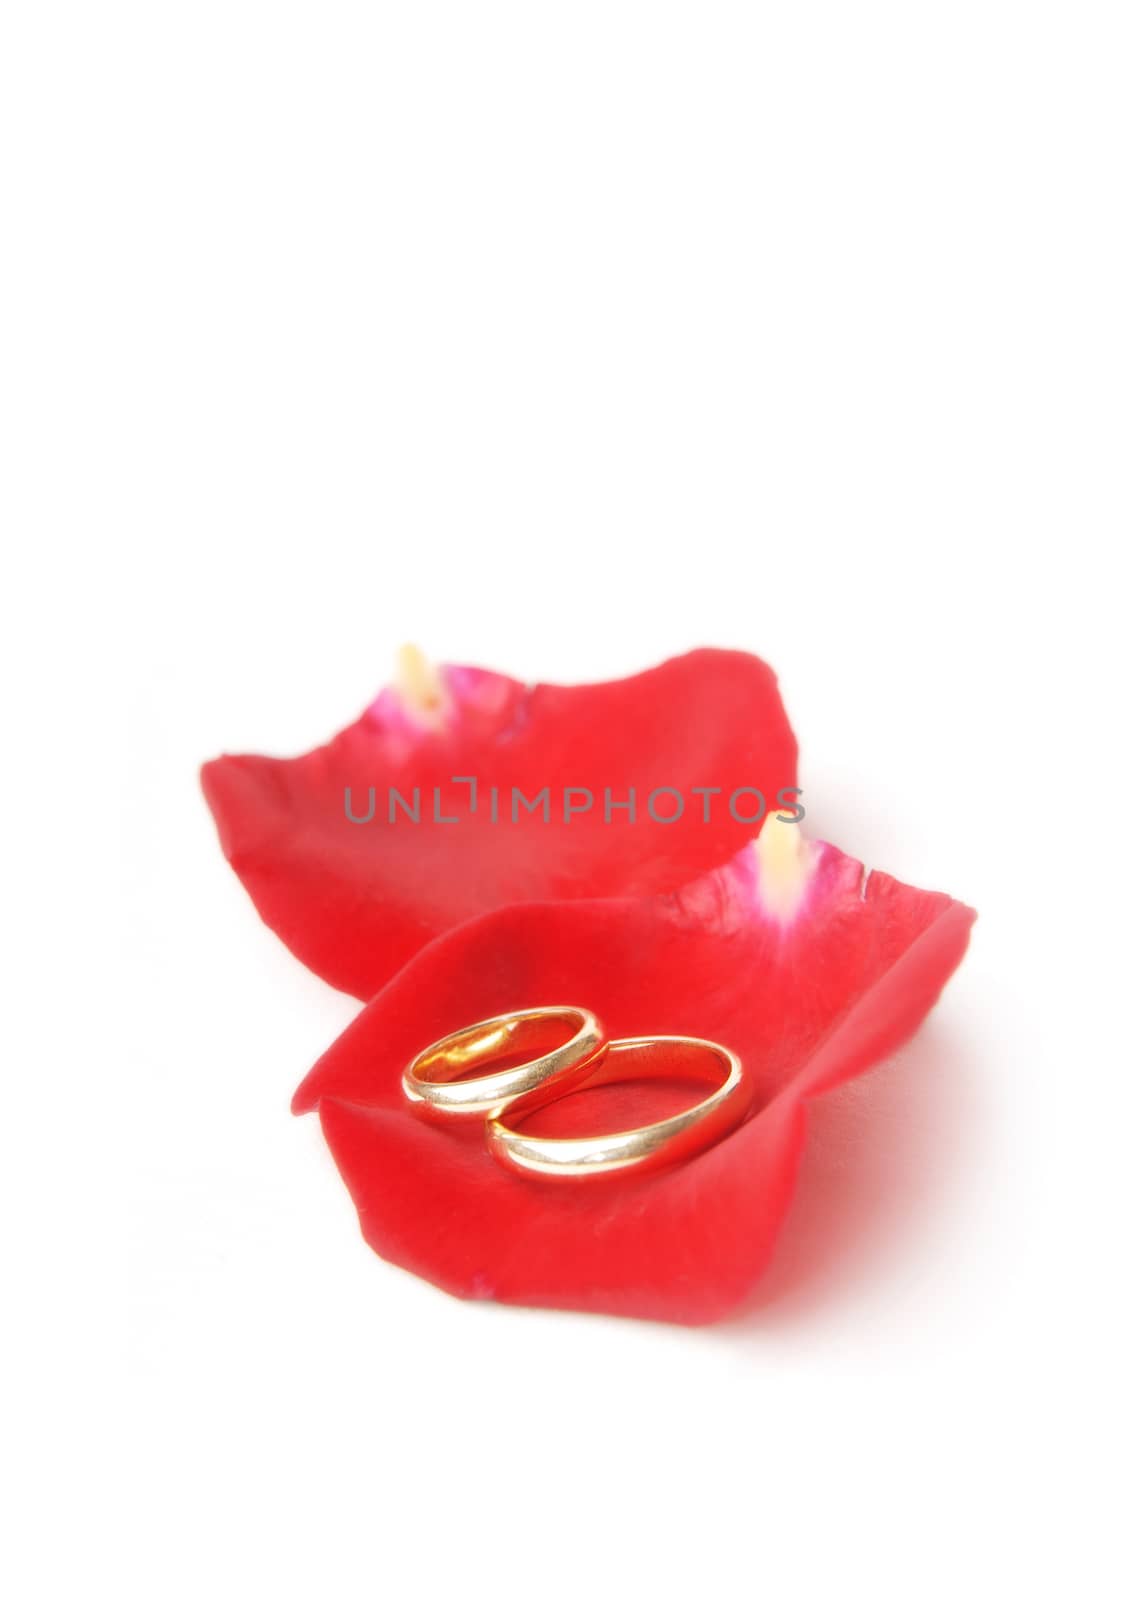 Close-up photo of the wedding rings on the rose petals